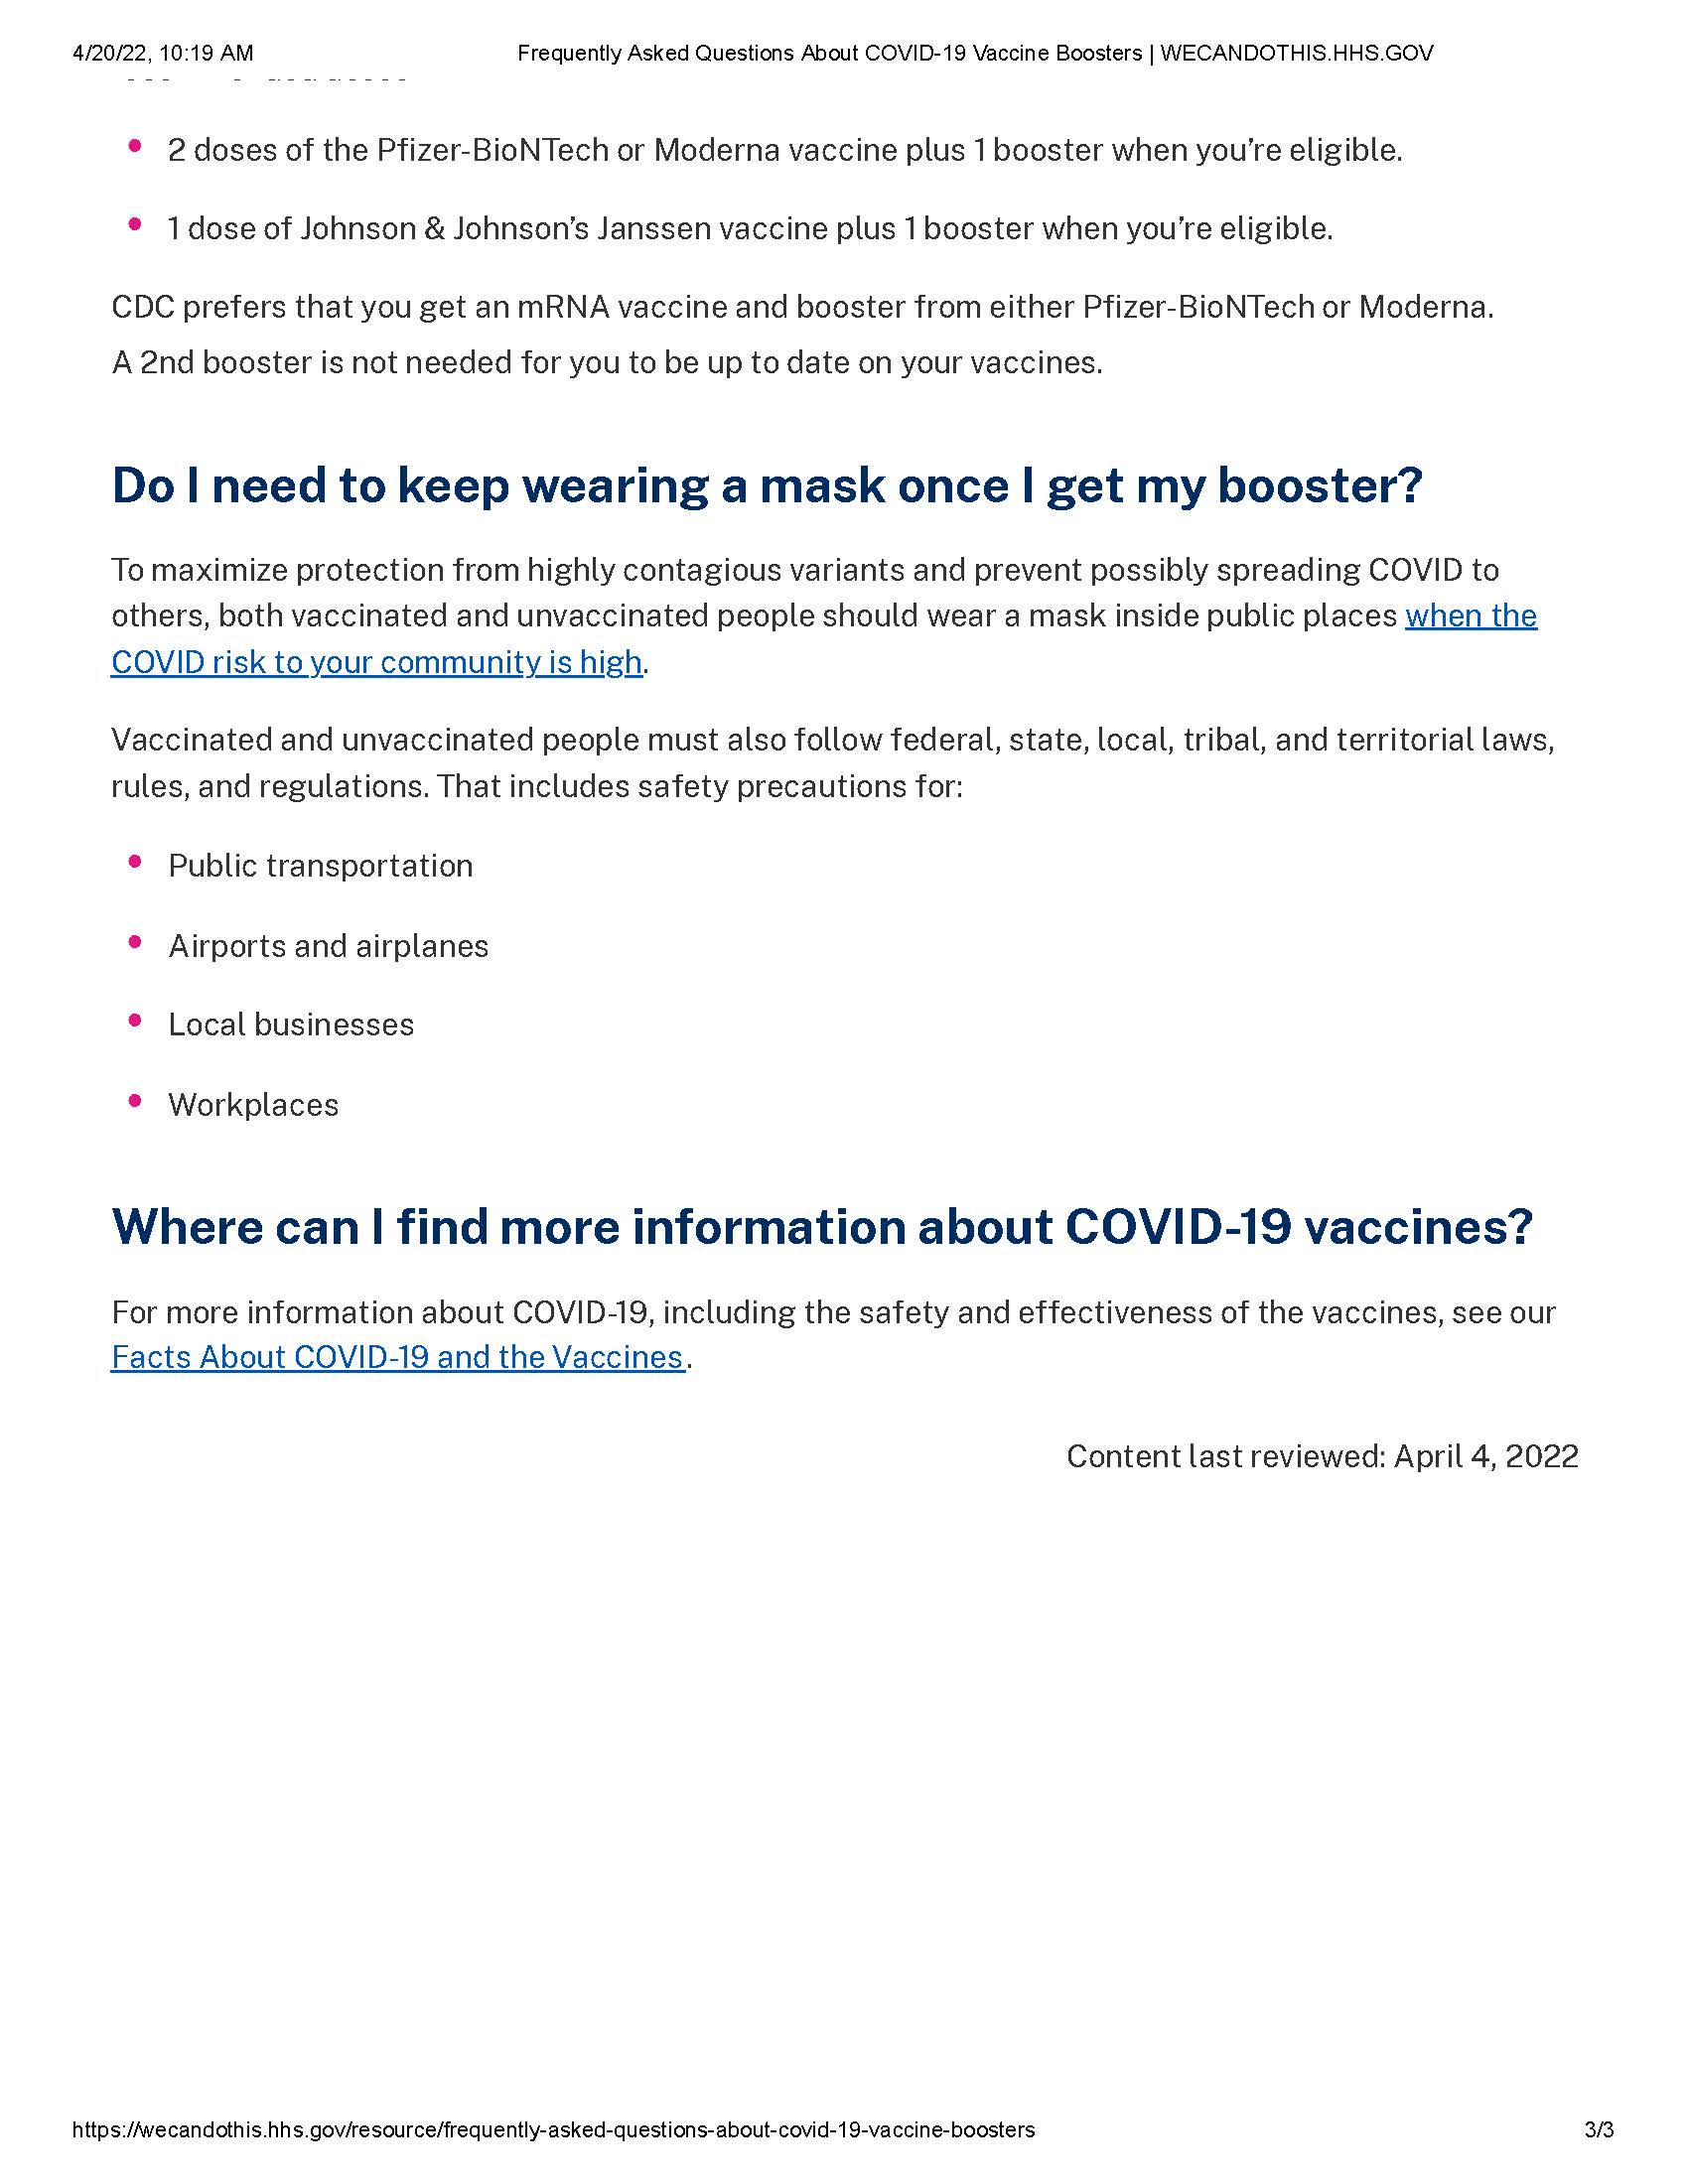 Frequently Asked Questions About COVID-19 Vaccine Boosters _ WECANDOTHIS.HHS.GOV_Page_3